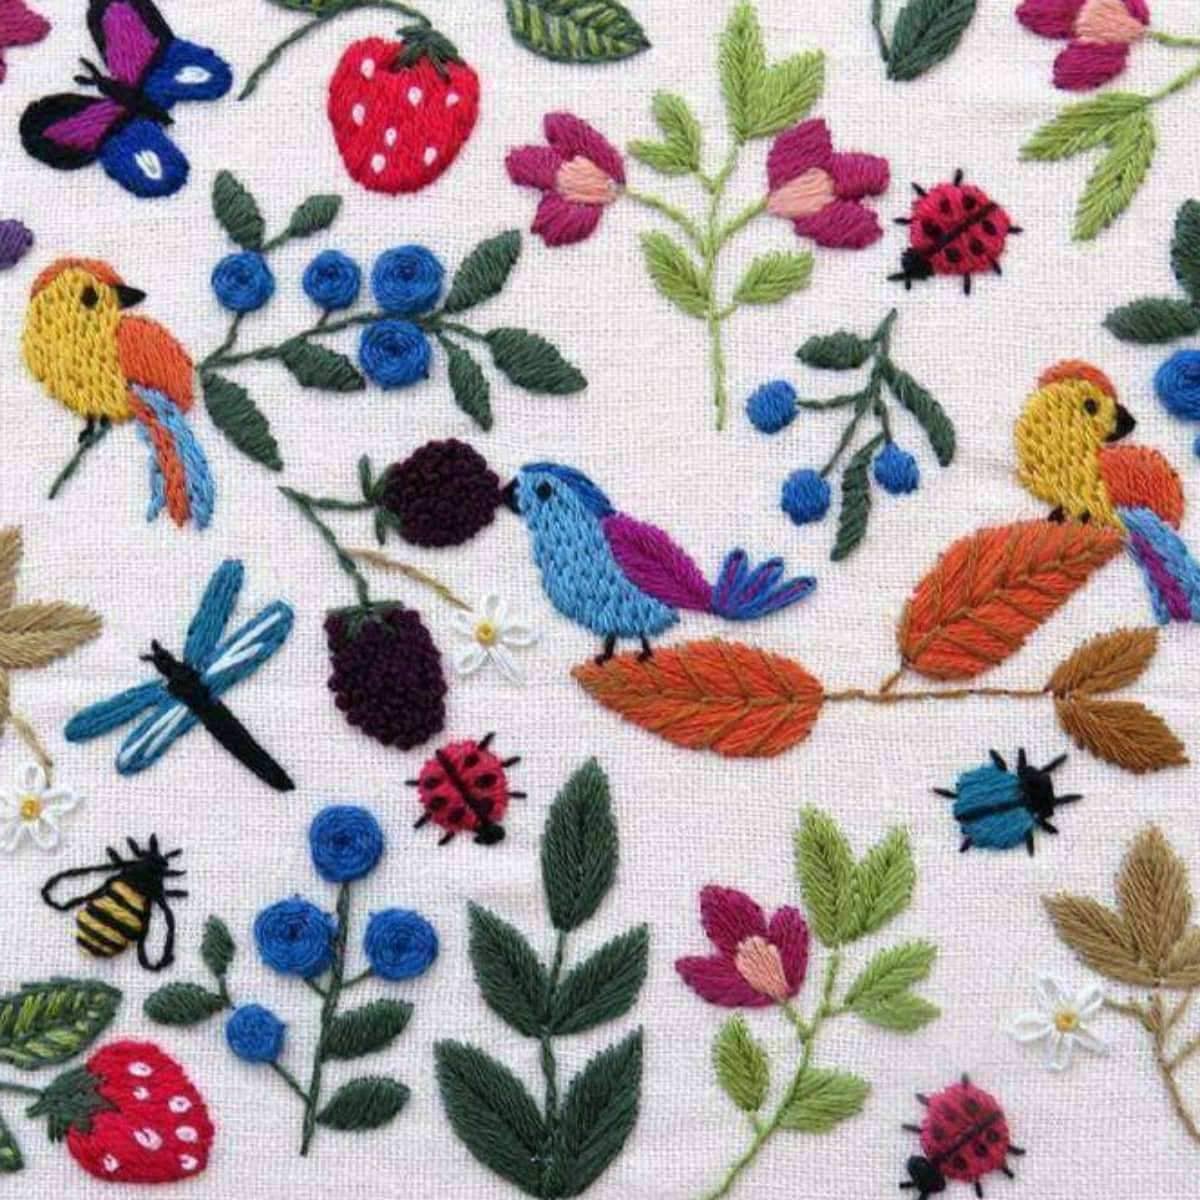 Birds, Bugs and Berries Hand Embroidery Pattern , PDF Download , StitchDoodles , bird embroidery, Embroidery, embroidery hoop, embroidery hoop kit, Embroidery Kit, embroidery kit for adults, embroidery kit fro beginners, embroidery pattern, hand embroidery fabric, hand embroidery seat frame, modern embroidery kits, nurge embroidery hoop, Printed Pattern, wildlife embroidery , StitchDoodles , shop.stitchdoodles.com